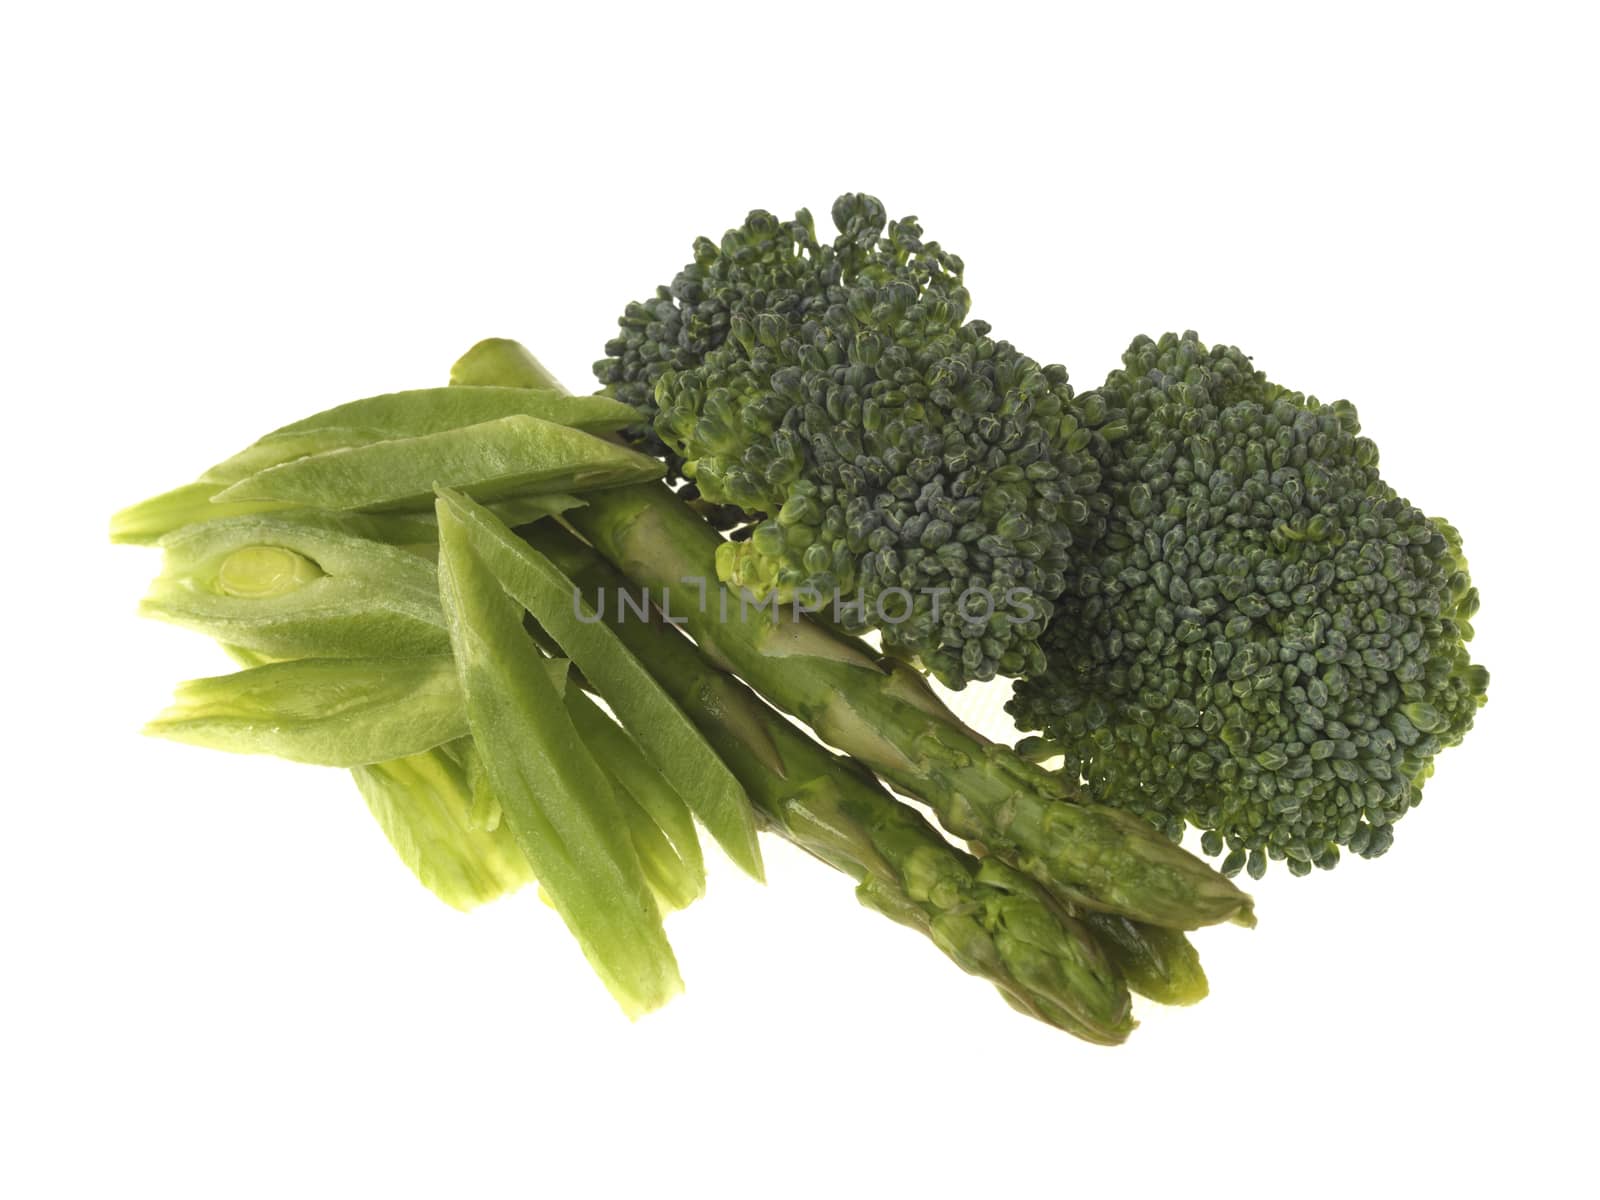 Broccoli Asparagus and Runner Beans by Whiteboxmedia